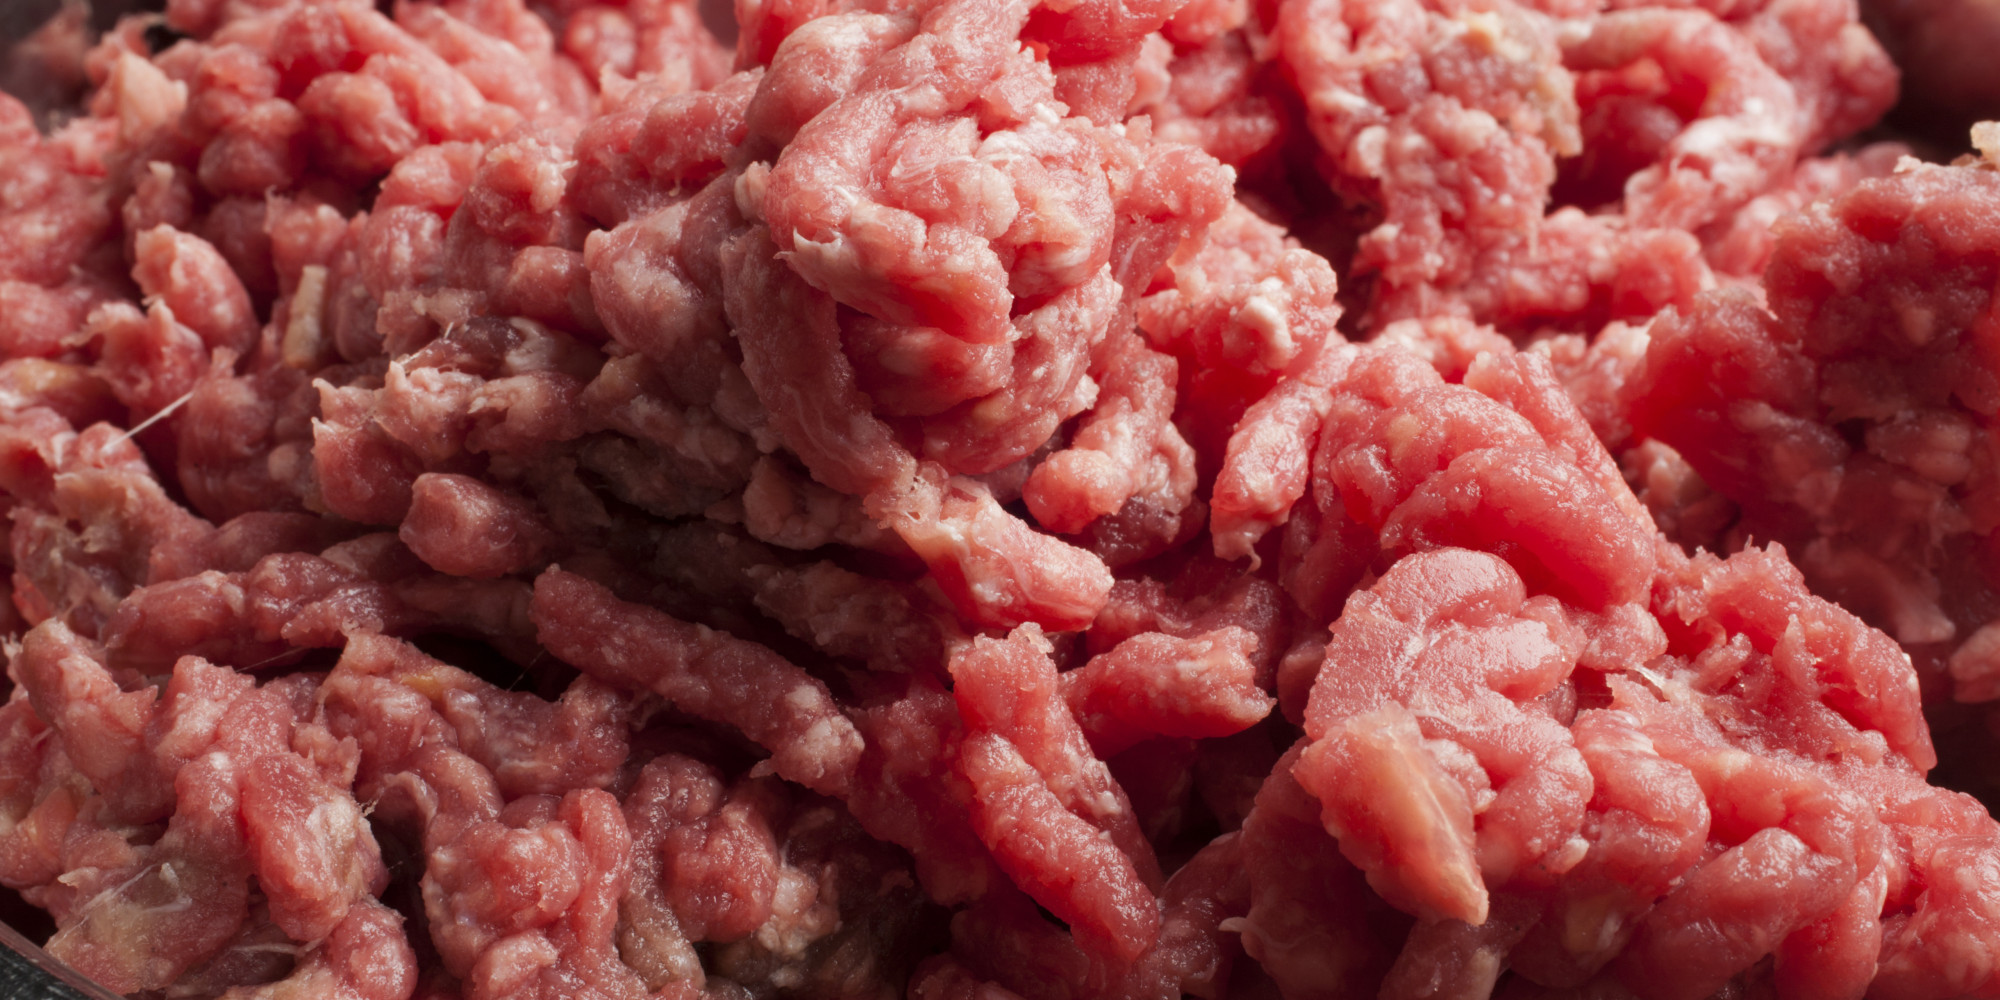 Cannibal Sandwiches' Made Of Raw Ground Beef Cause Food Poisoning In ...